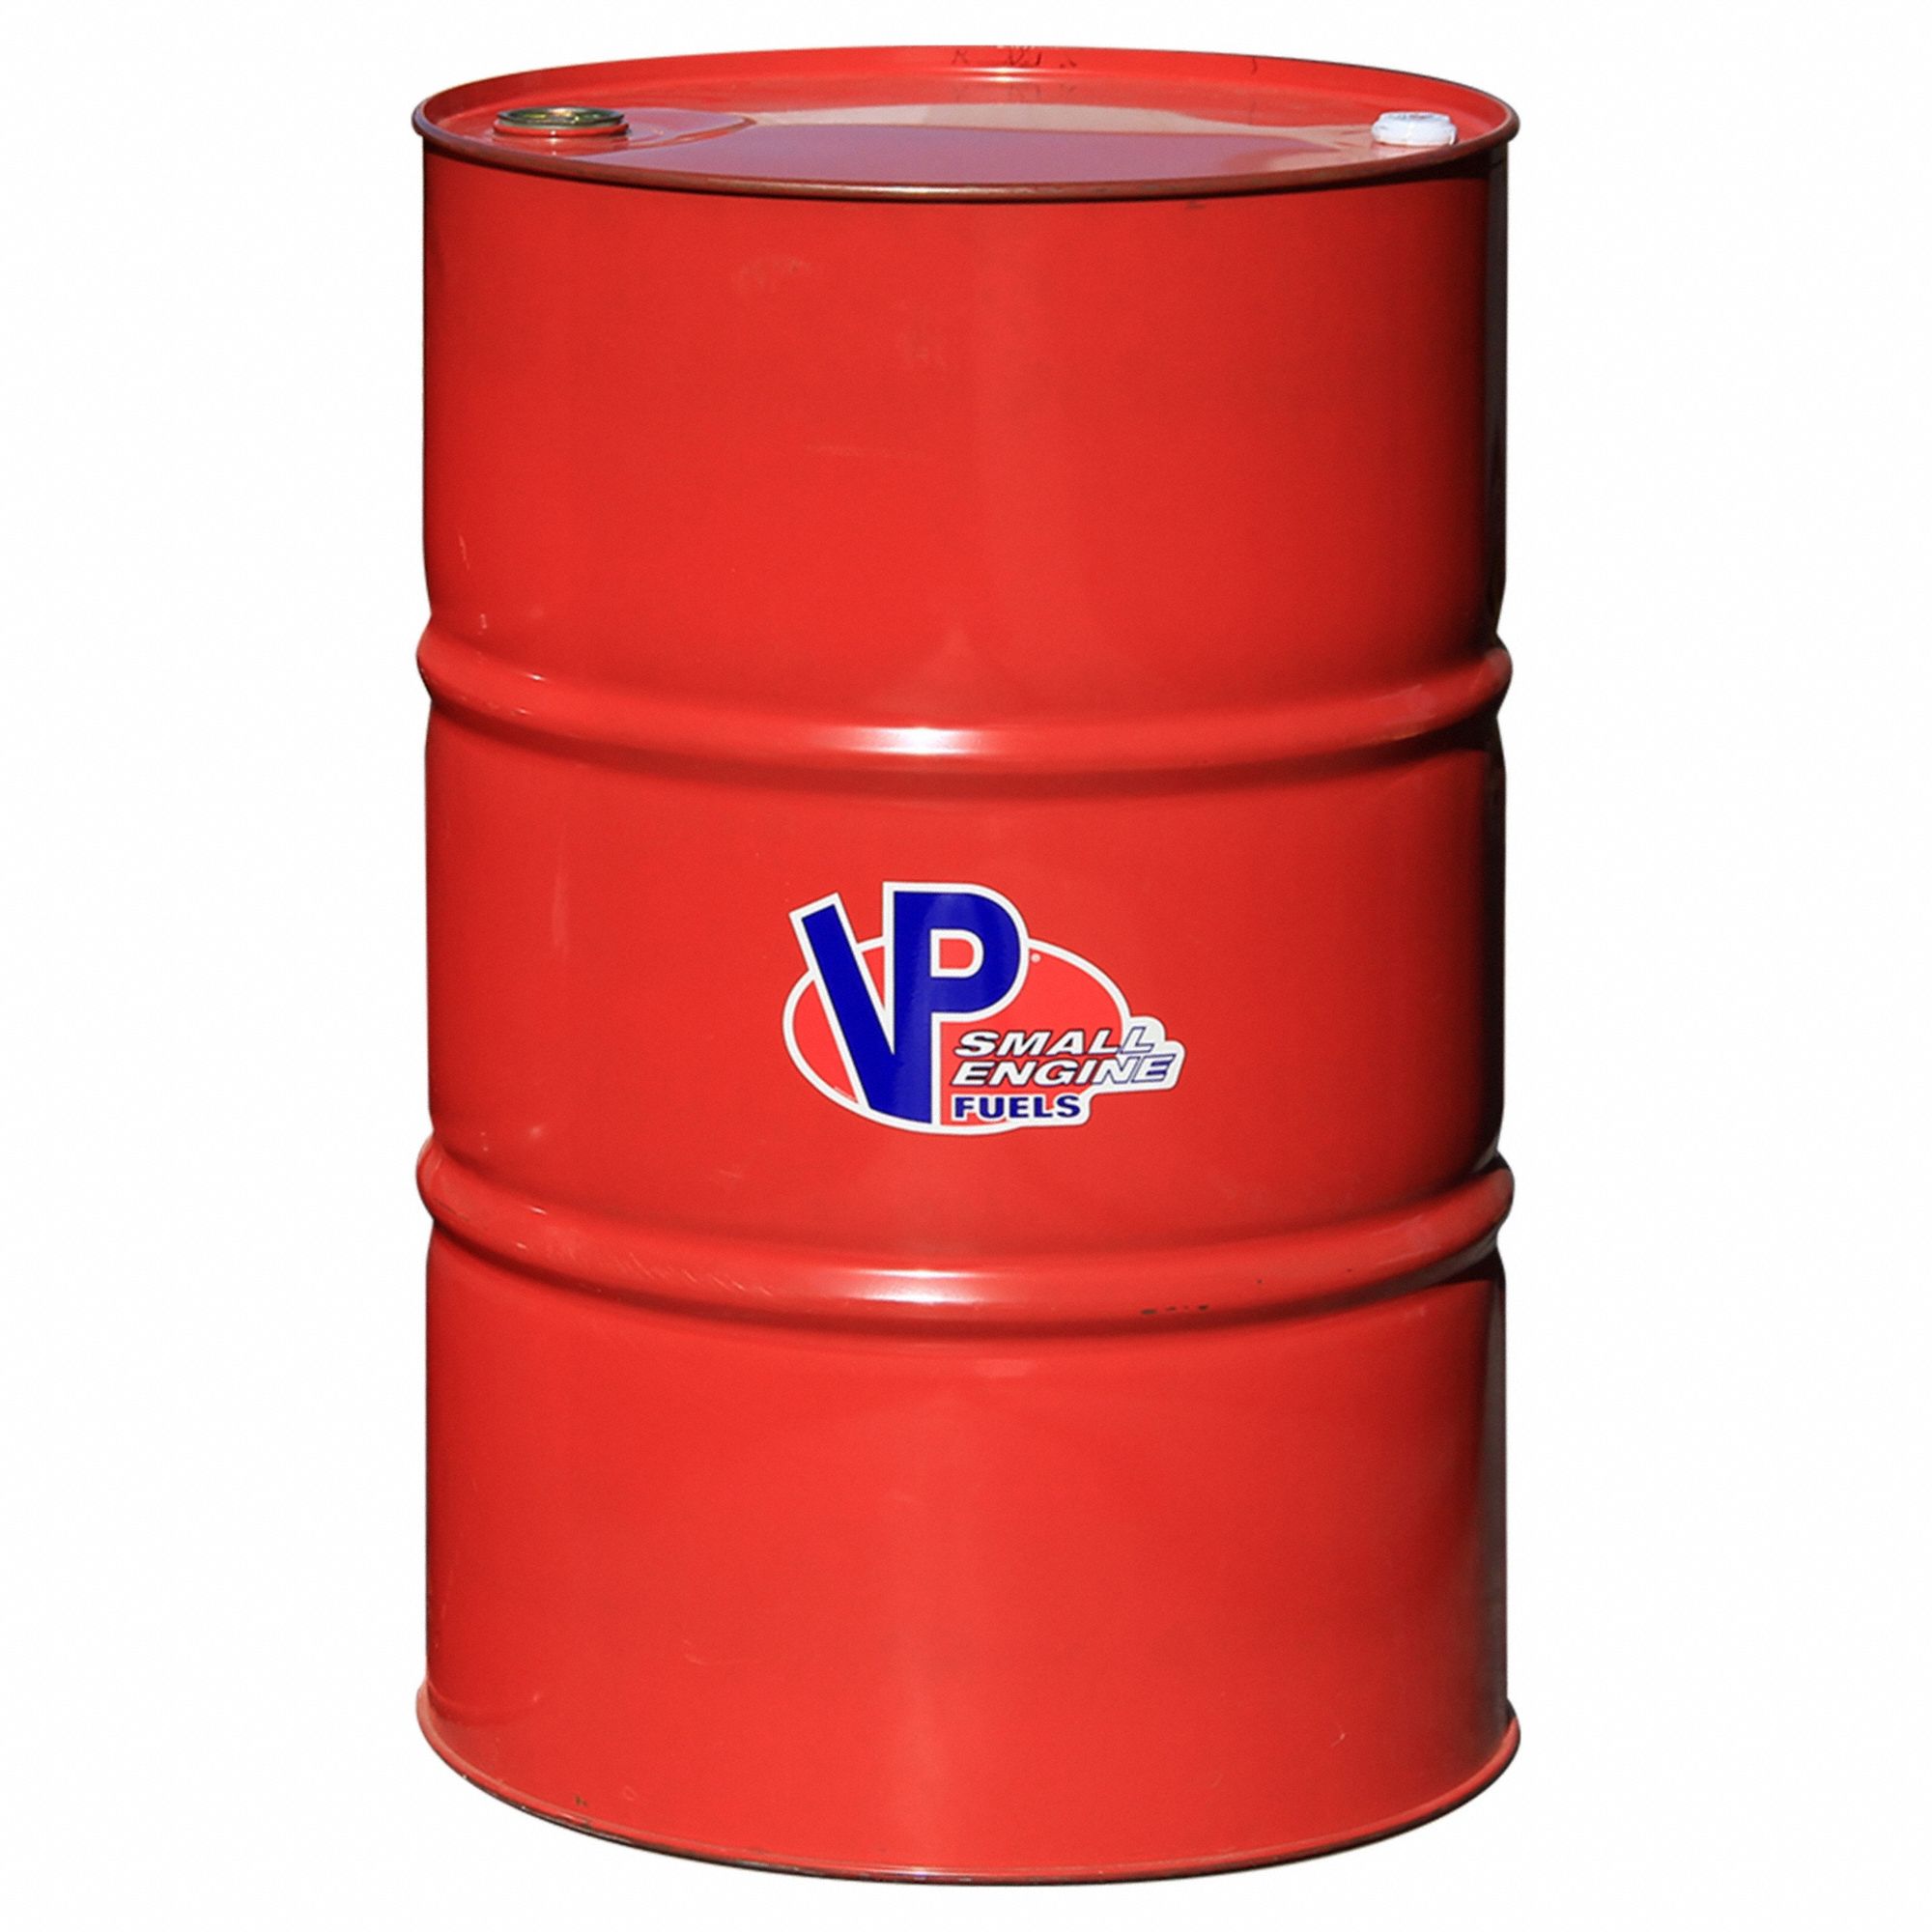 Small Engine Fuel, 2 Cycle: 50:1, 54 gal Container Size, Drum, 2-Cycle